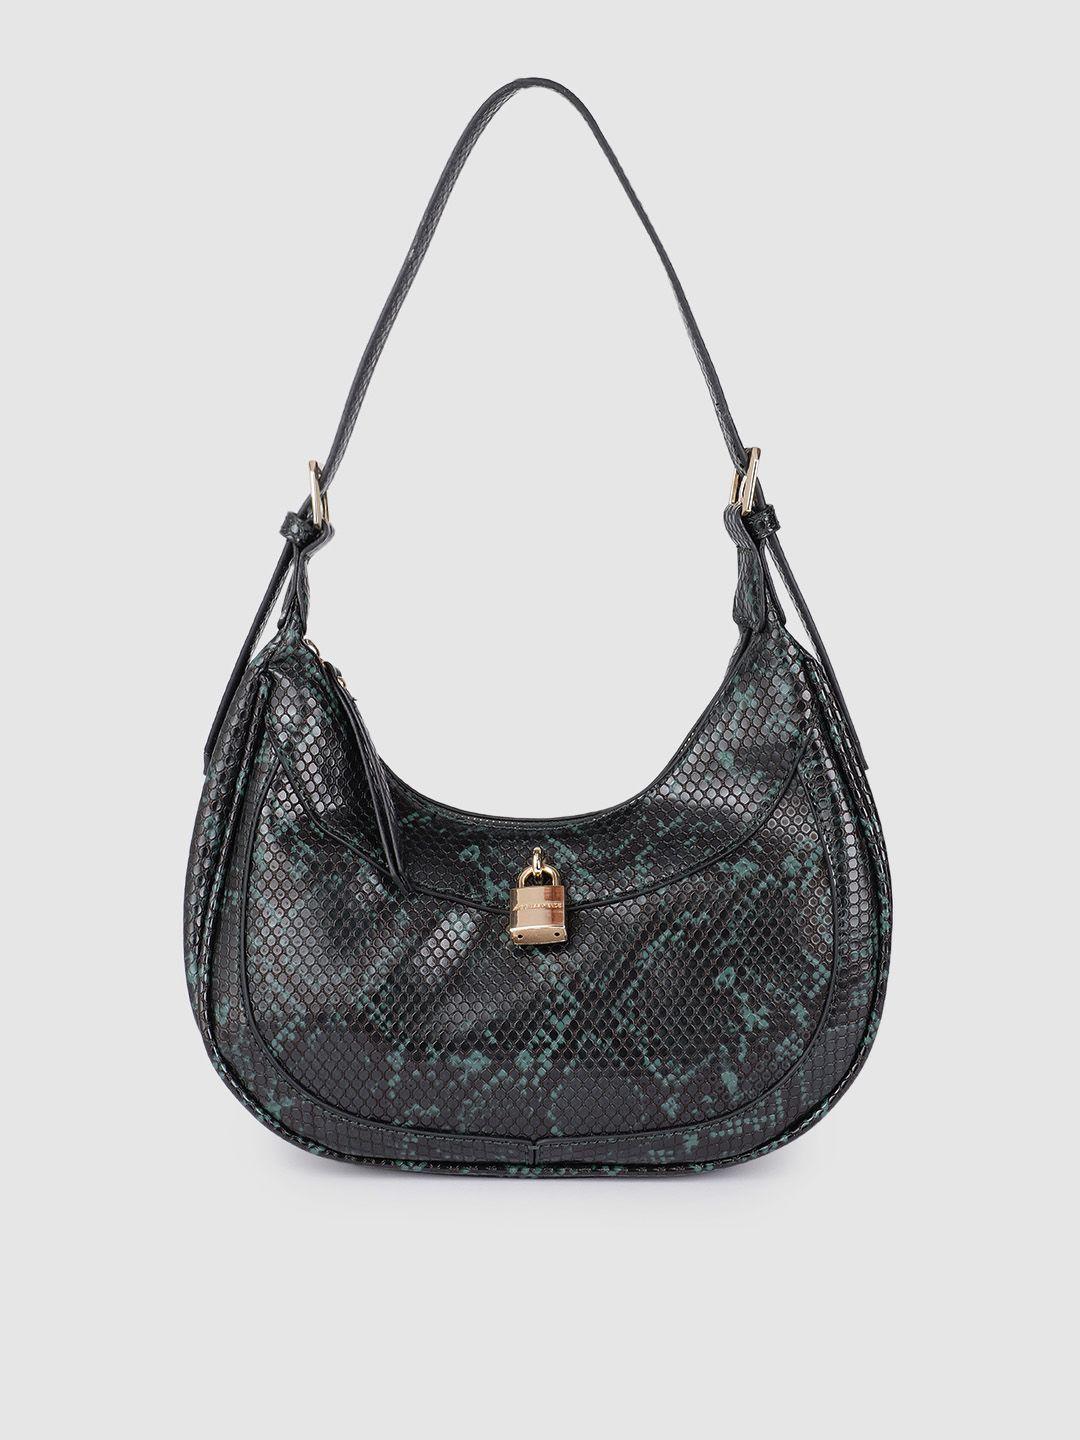 accessorize teal green & black textured structured hobo bag